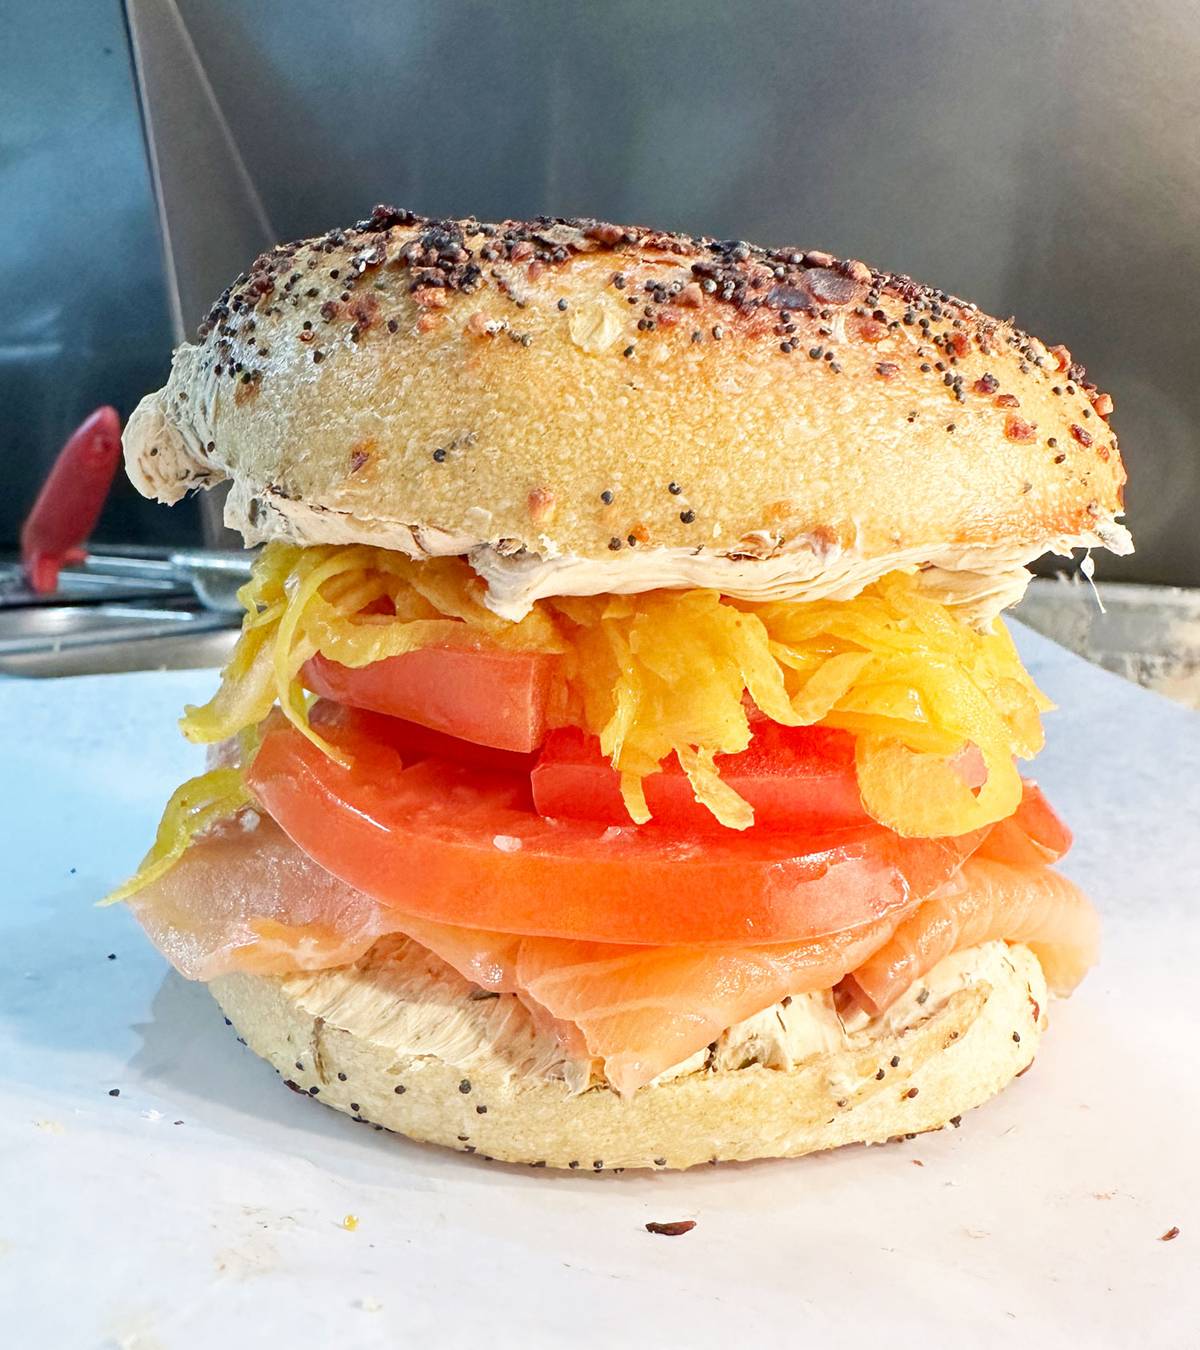 House smoked salmon, layered with charred scallion cream cheese, amba-pickled shallots, and heirloom tomato, on a Chicago-style everything bagel from Edith's in Brooklyn